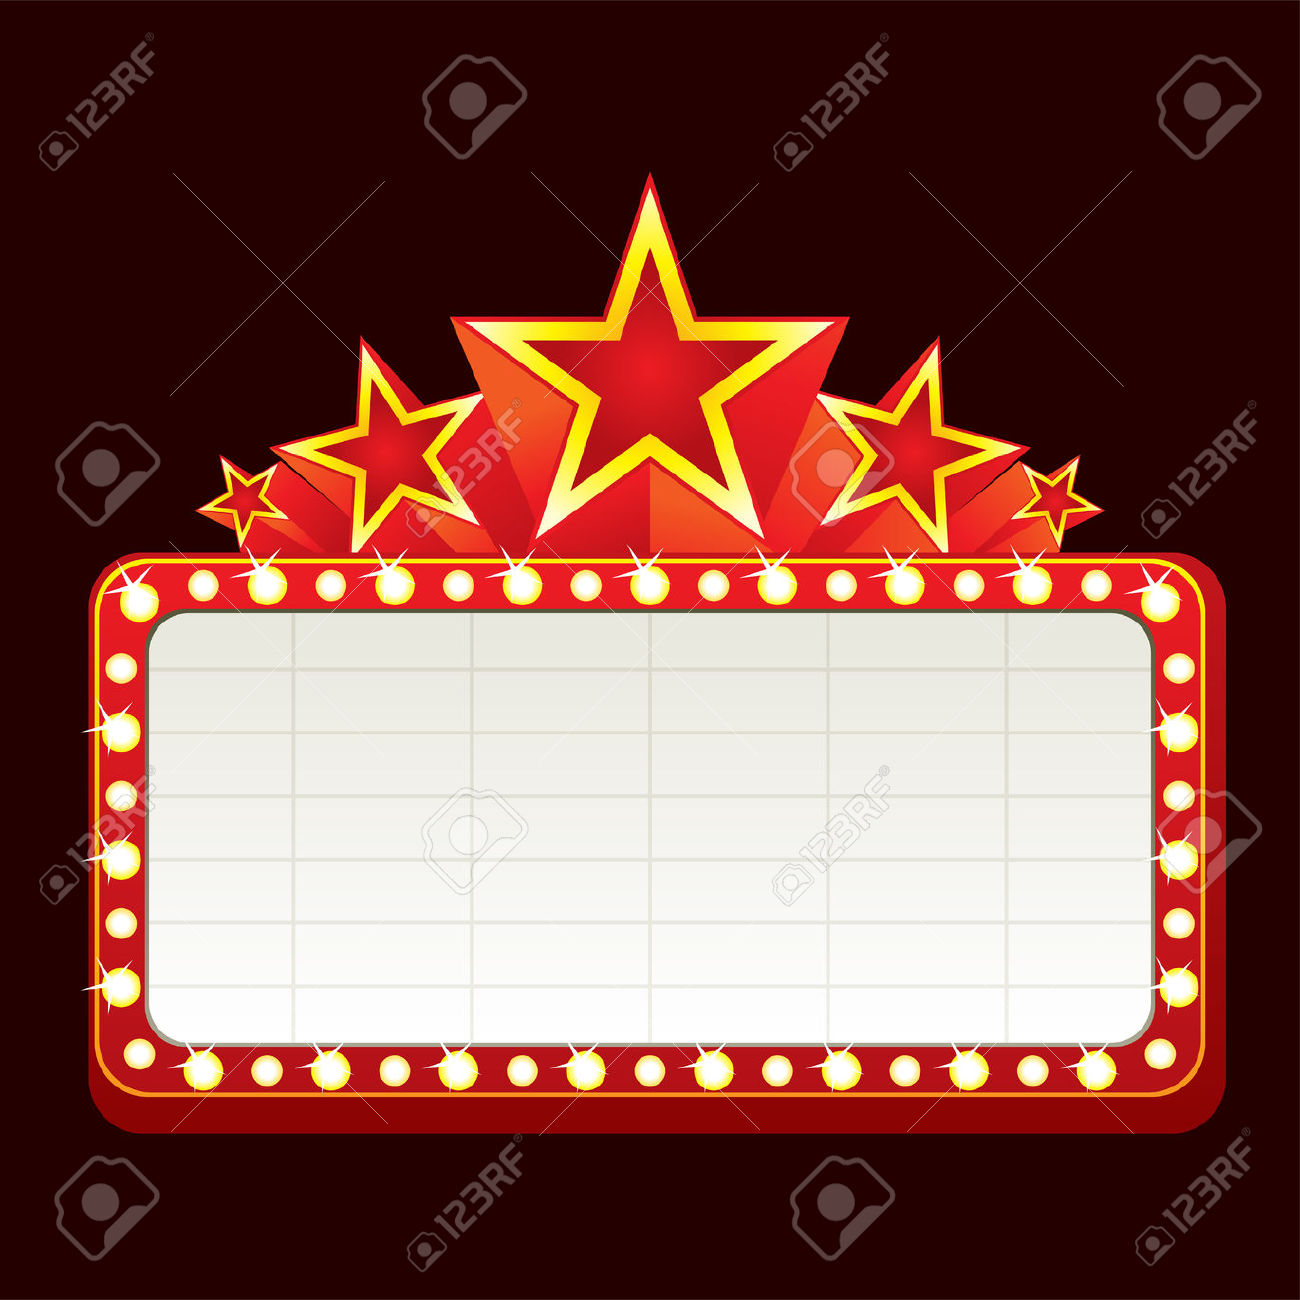 Marquee Clipart & Marquee Clip Art Images.